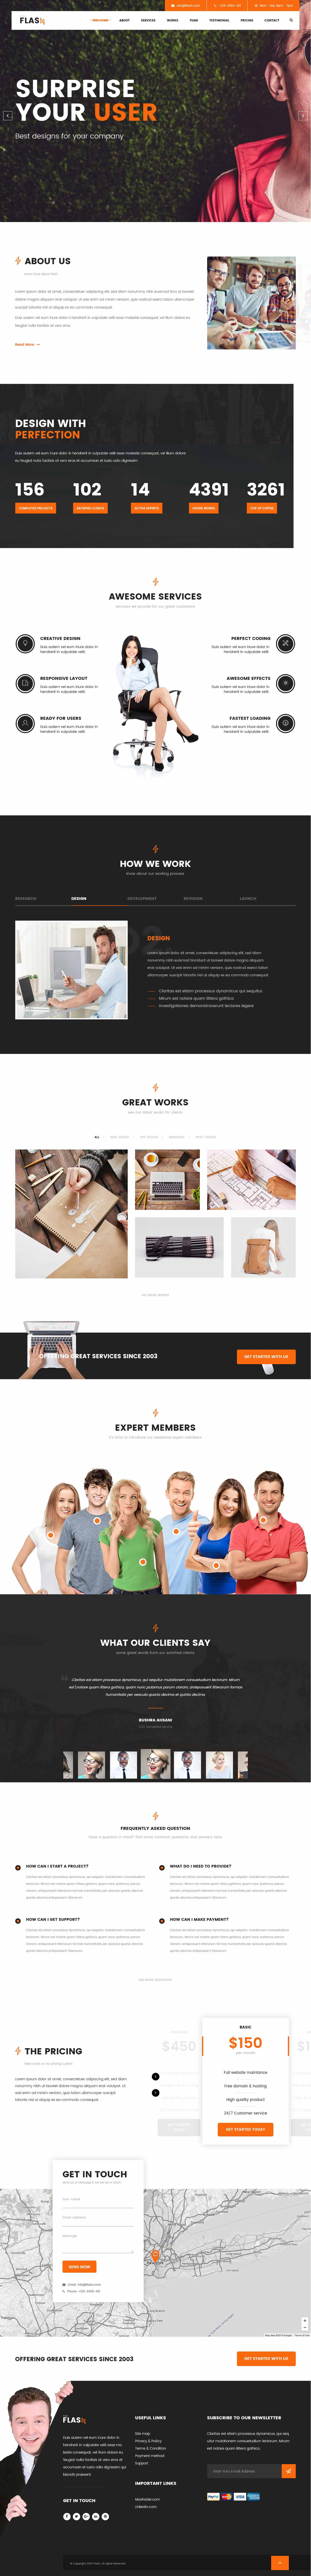 FLASH - One Page HTML Bootstrap Template for Agency, Startup, Business - 2